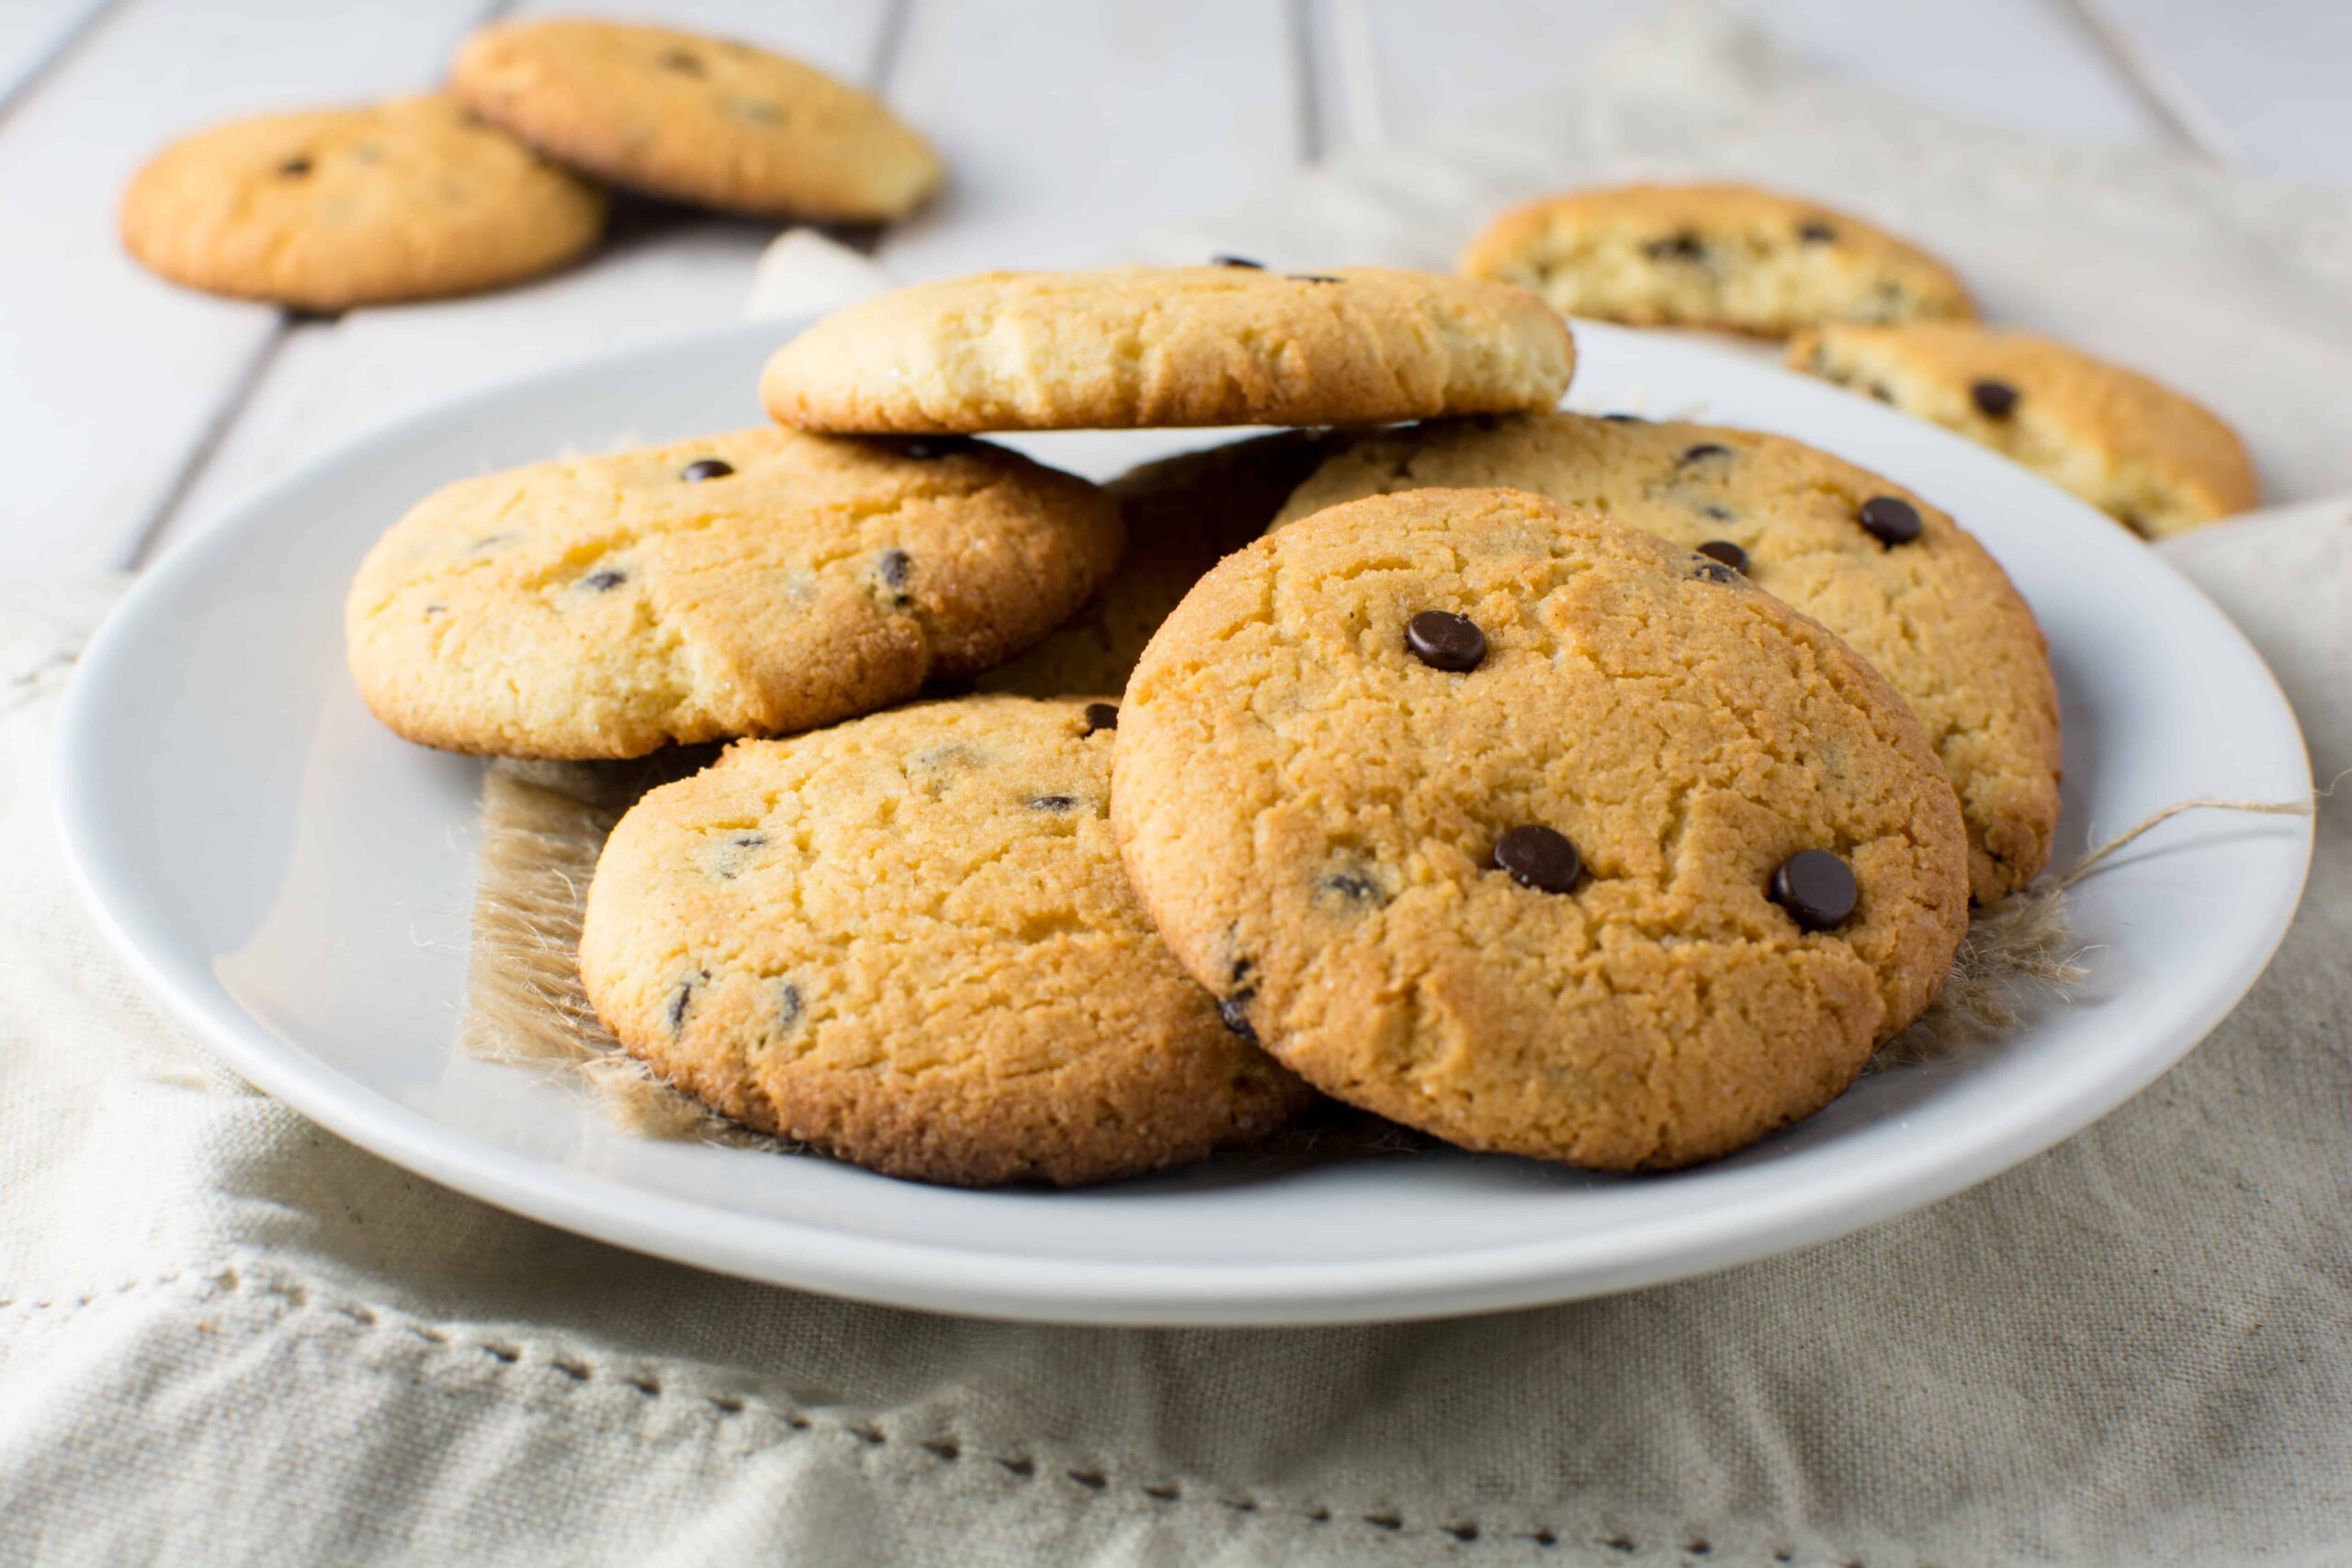 keto chocolate chip cookies with xanthan gum